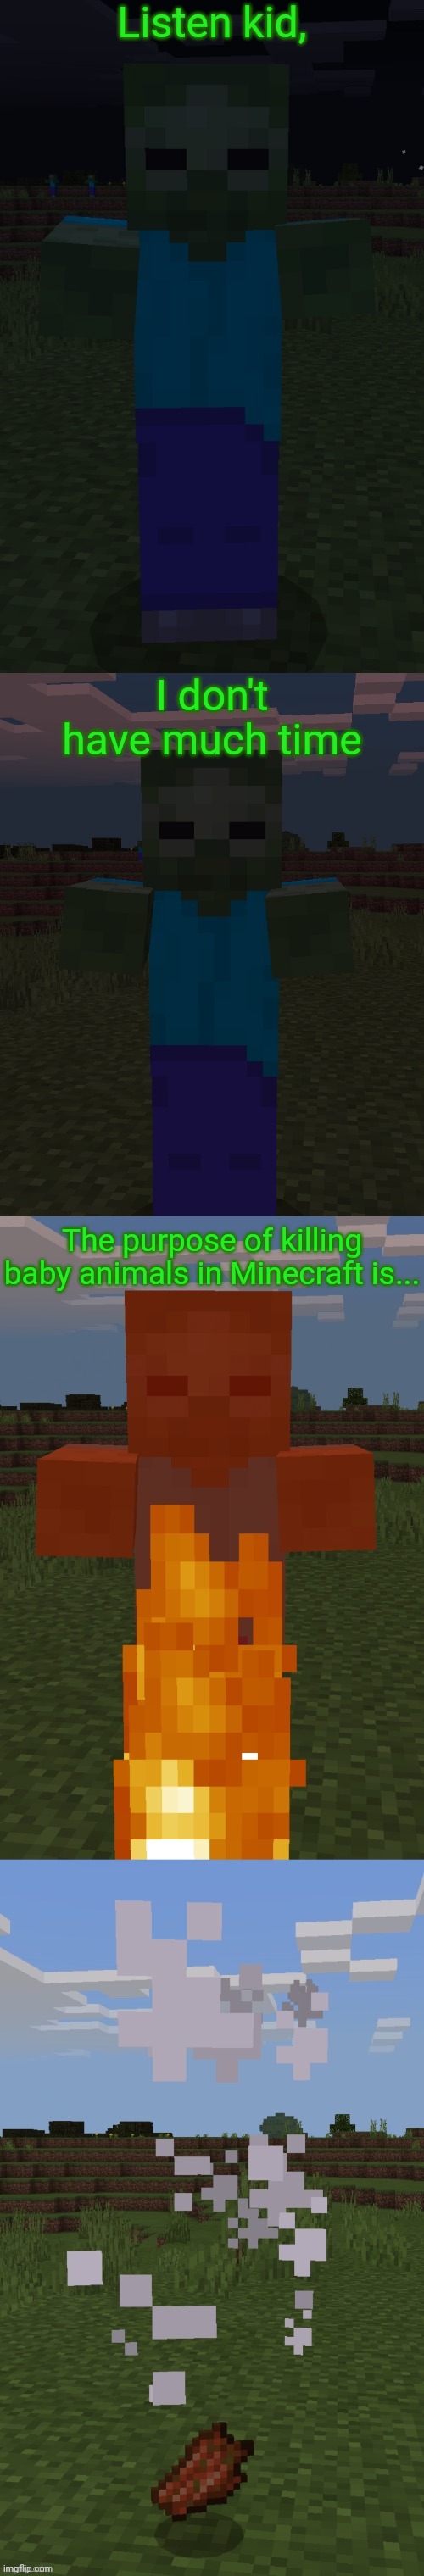 Burning Zombie | Listen kid, I don't have much time; The purpose of killing baby animals in Minecraft is... | image tagged in burning zombie,there is no purpose,barney will eat all of your delectable biscuits | made w/ Imgflip meme maker